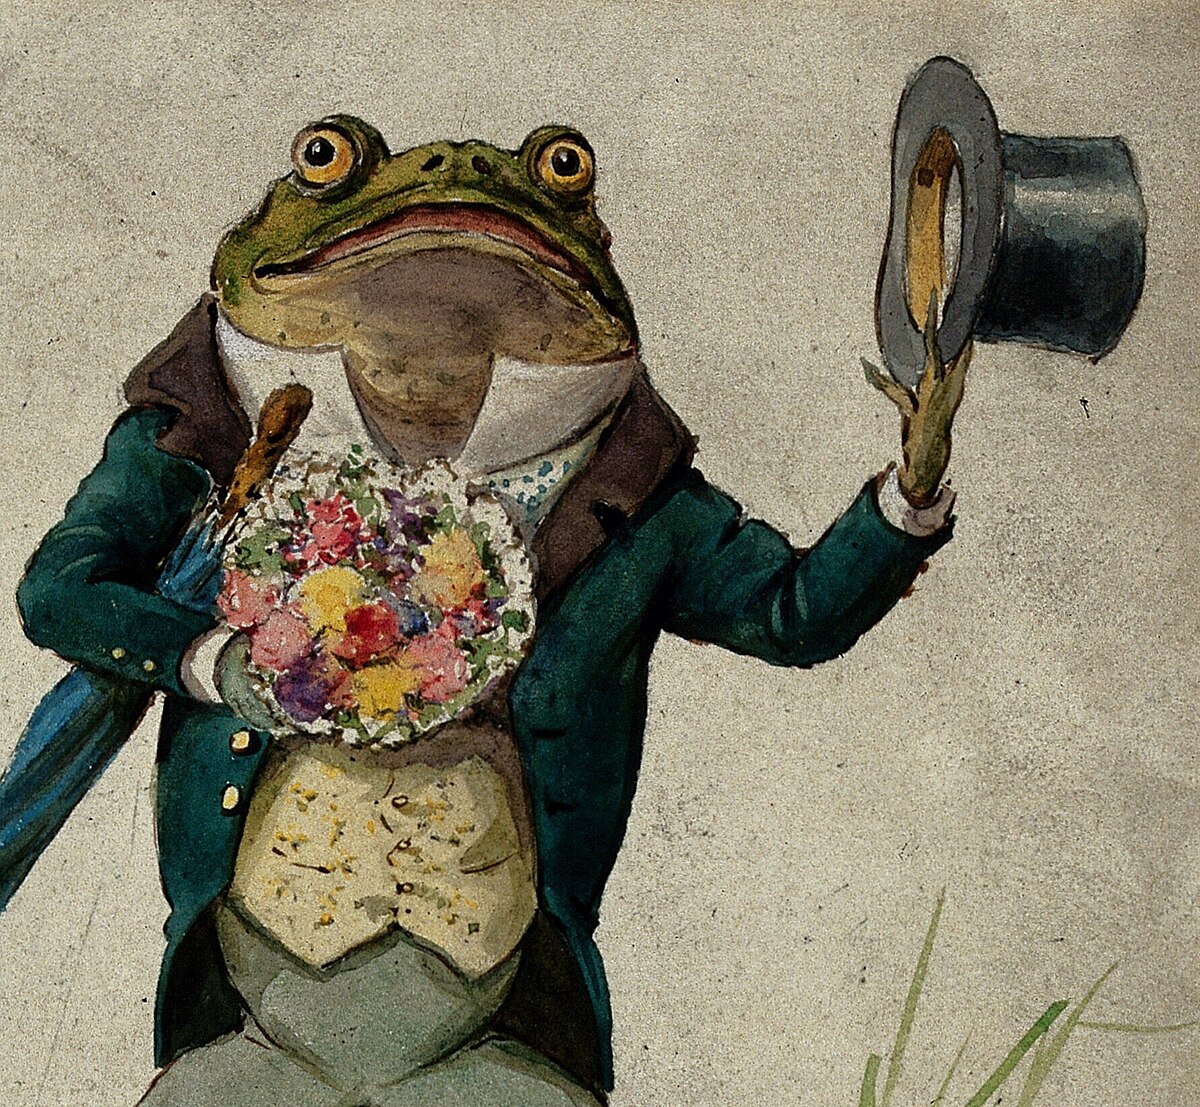 File:Frog dressed as gentleman with flowers, top hat and umbrella